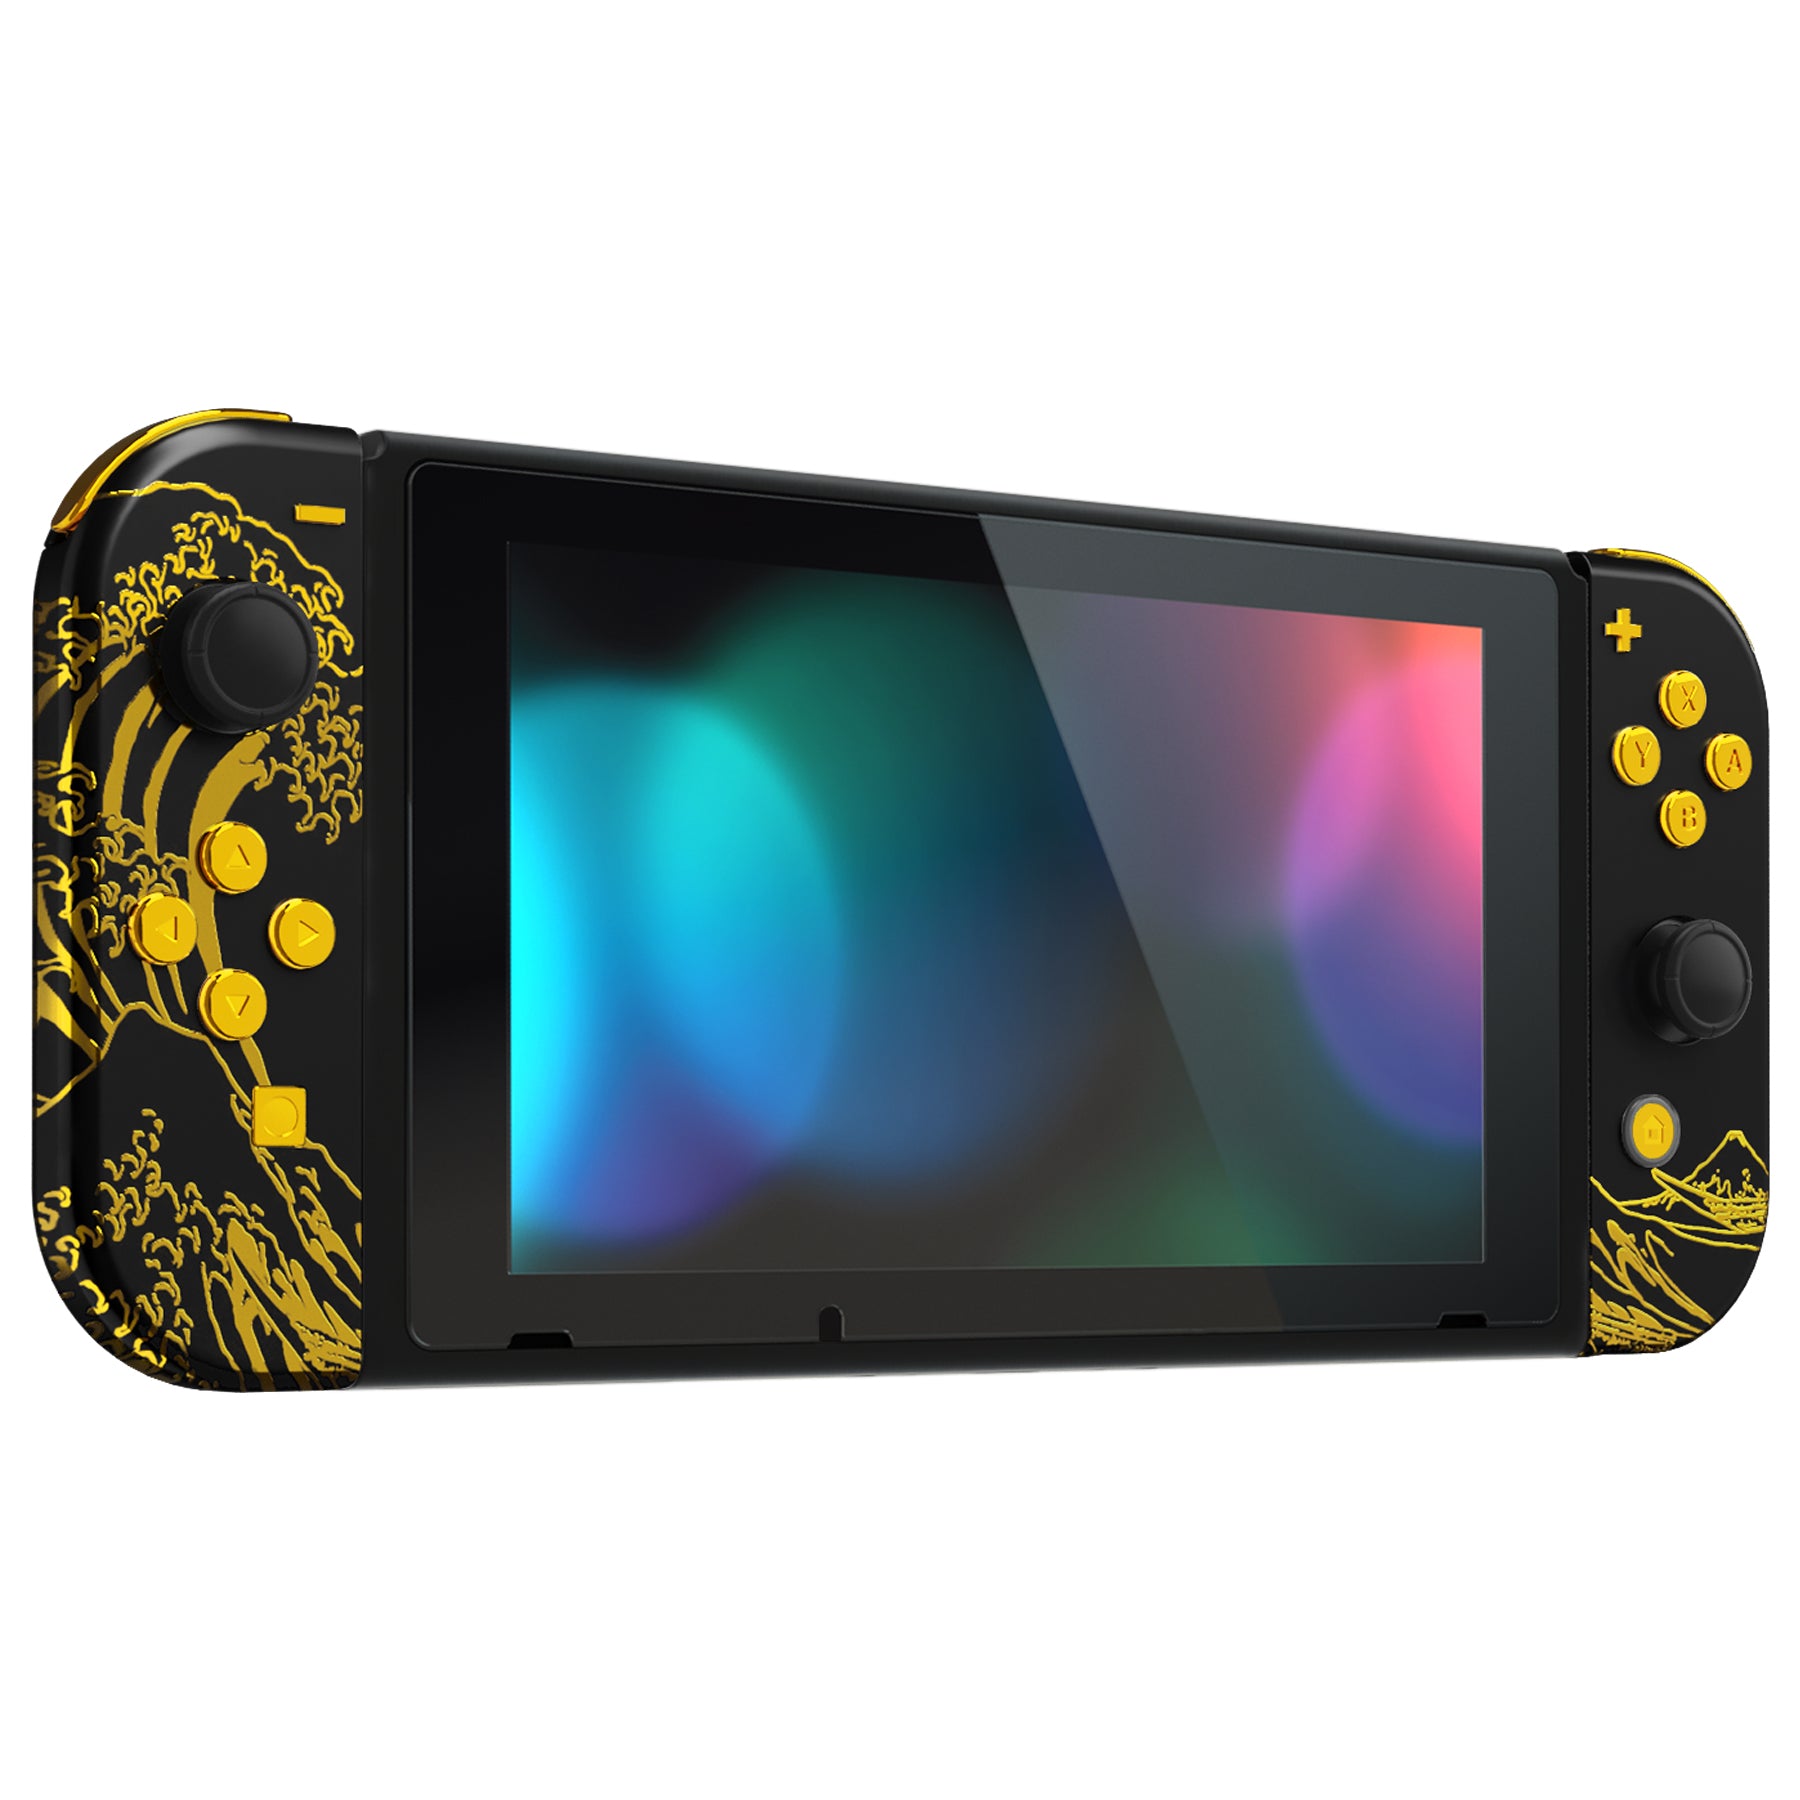 eXtremeRate Retail The Great GOLDEN Wave Off Kanagawa - Black Handheld Console Back Plate, Joycon Handheld Controller Housing Shell With Full Set Buttons DIY Replacement Part for Nintendo Switch - QT120